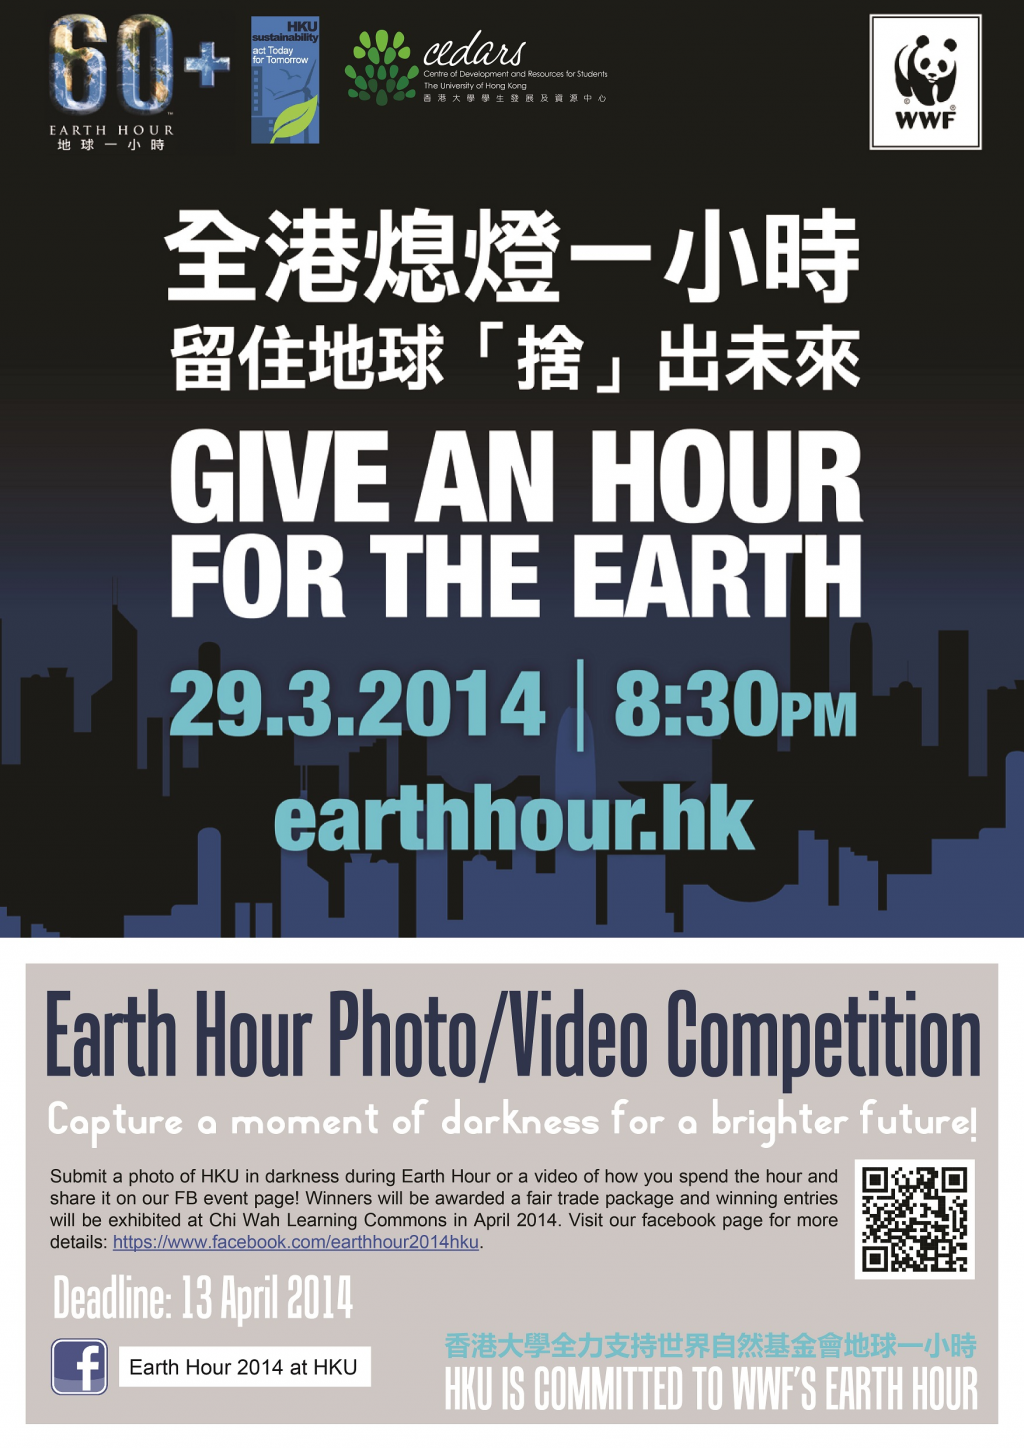 Earth Hour 2014 at HKU